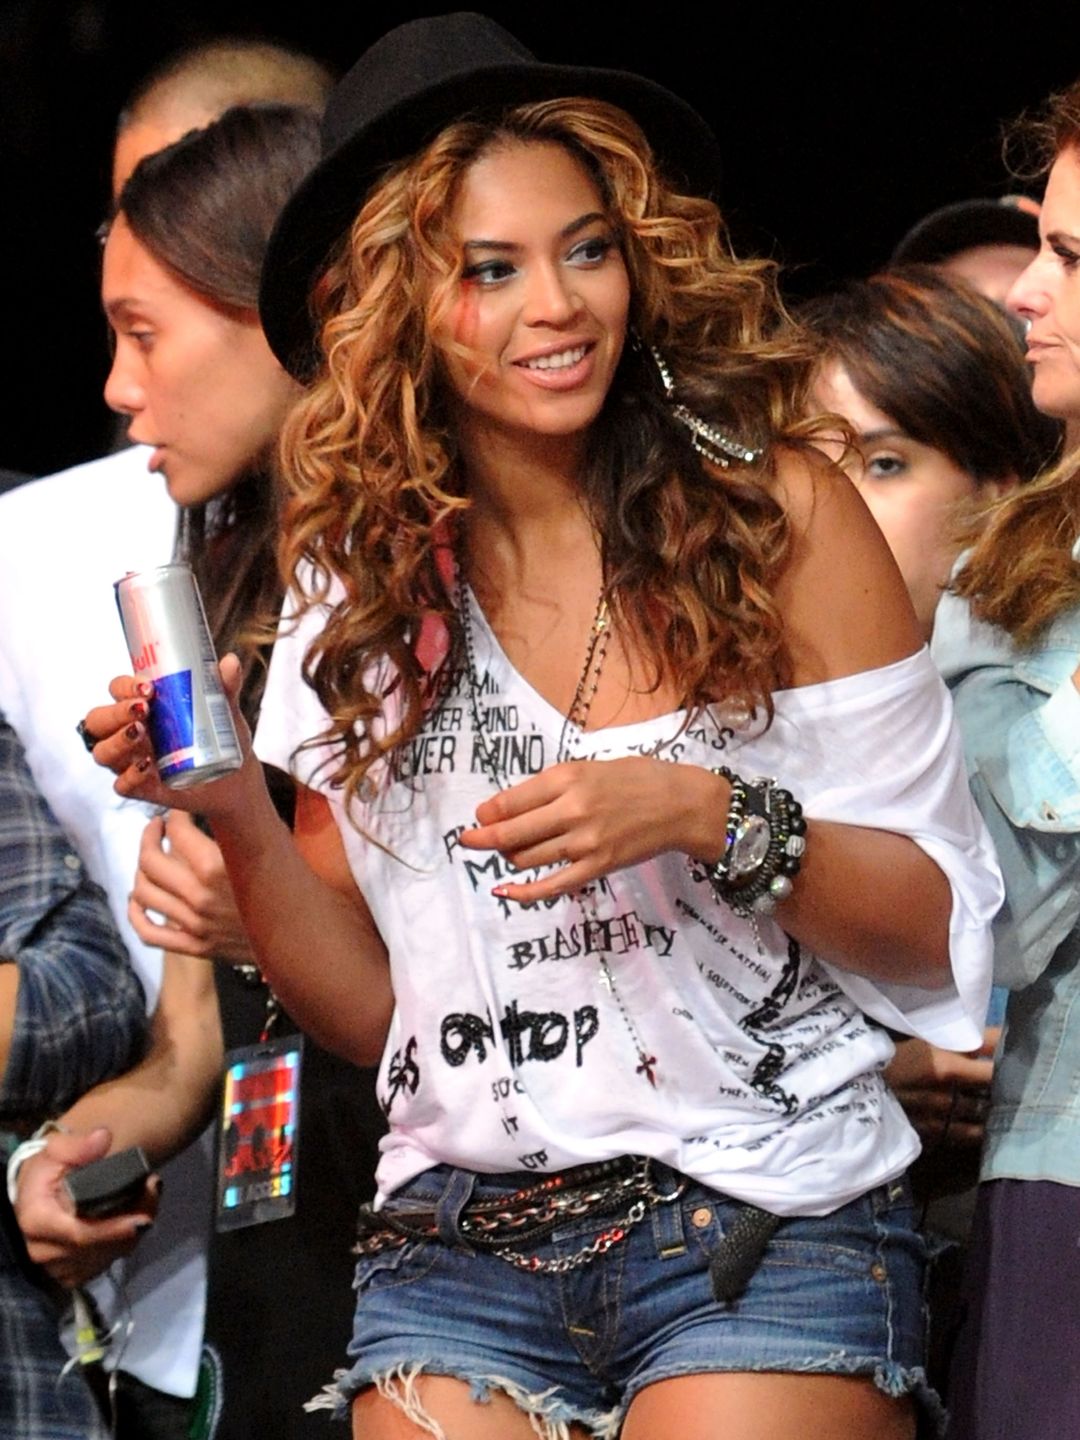 INDIO, CA - APRIL 16:  Singer Beyonce Knowles seen during Day 1 of the Coachella Valley Music & Art Festival 2010 held at the Empire Polo Club on April 16, 2010 in Indio, California.  (Photo by Michael Buckner/Getty Images)